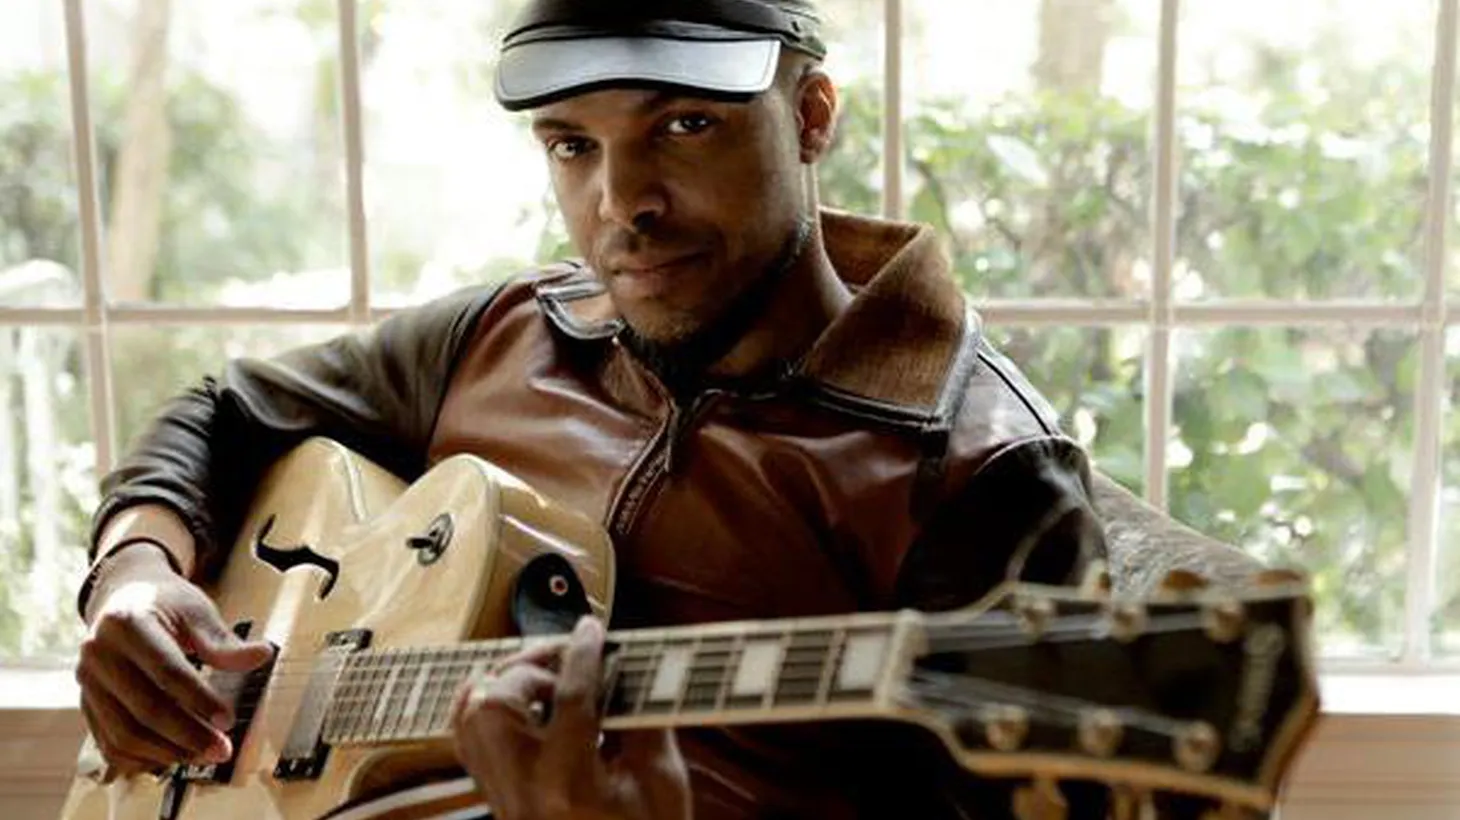 Grammy Award-winning multi-instrumentalist, songwriter and producer Van Hunt returns with his most adventurous album to date...